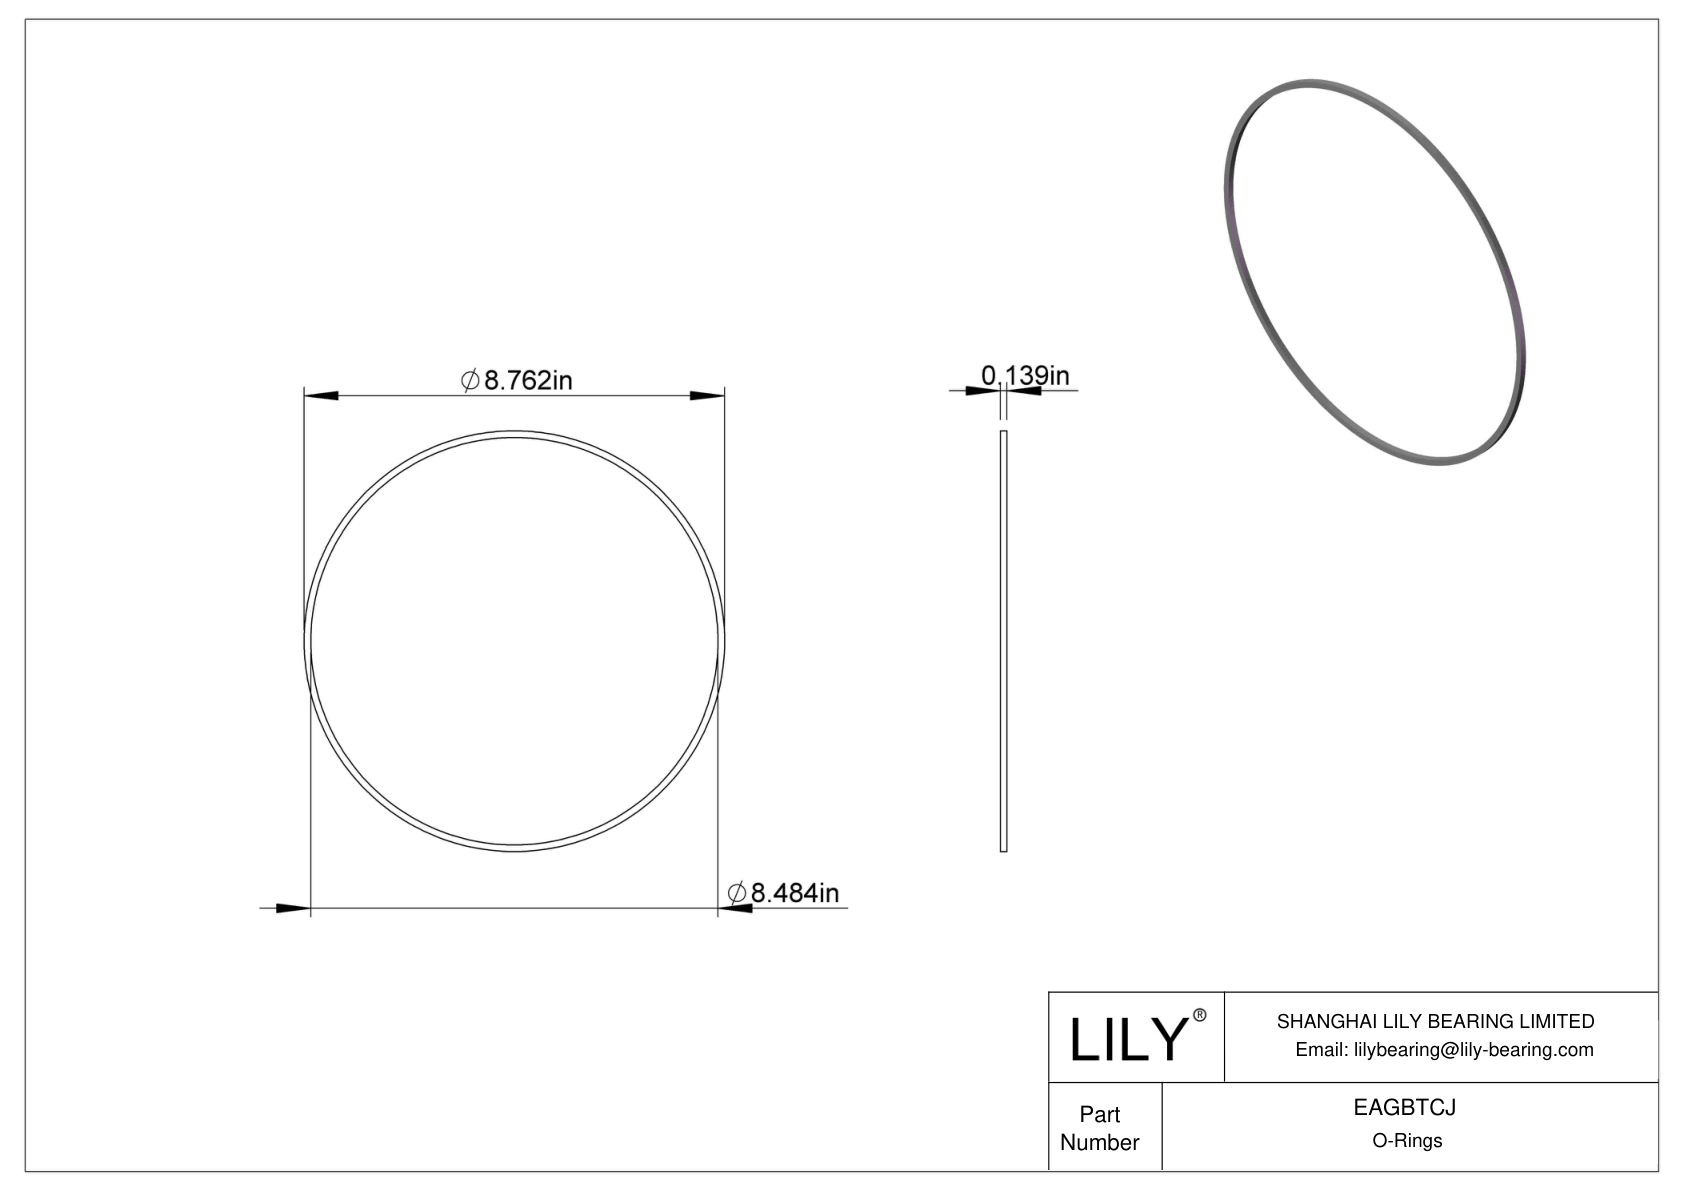 EAGBTCJ Oil Resistant O-Rings Square cad drawing